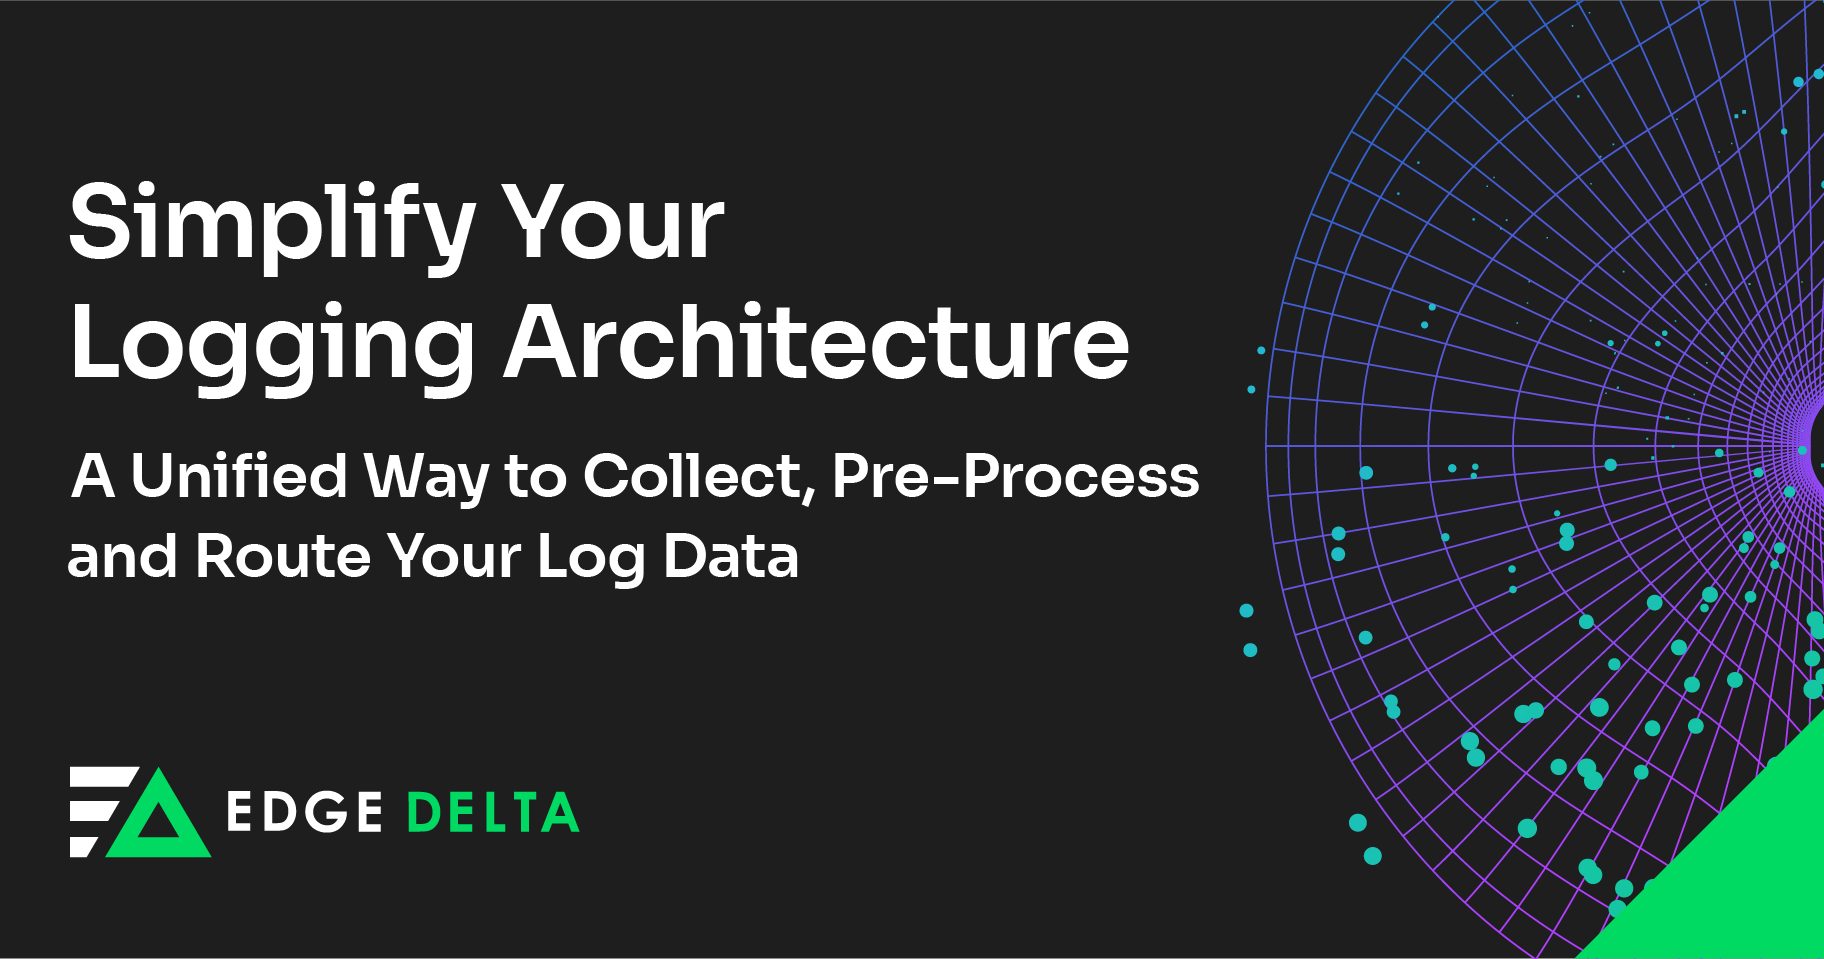 Simplify Your Logging Architecture: A Unified Way to Collect, Pre-Process and Route Your Log Data